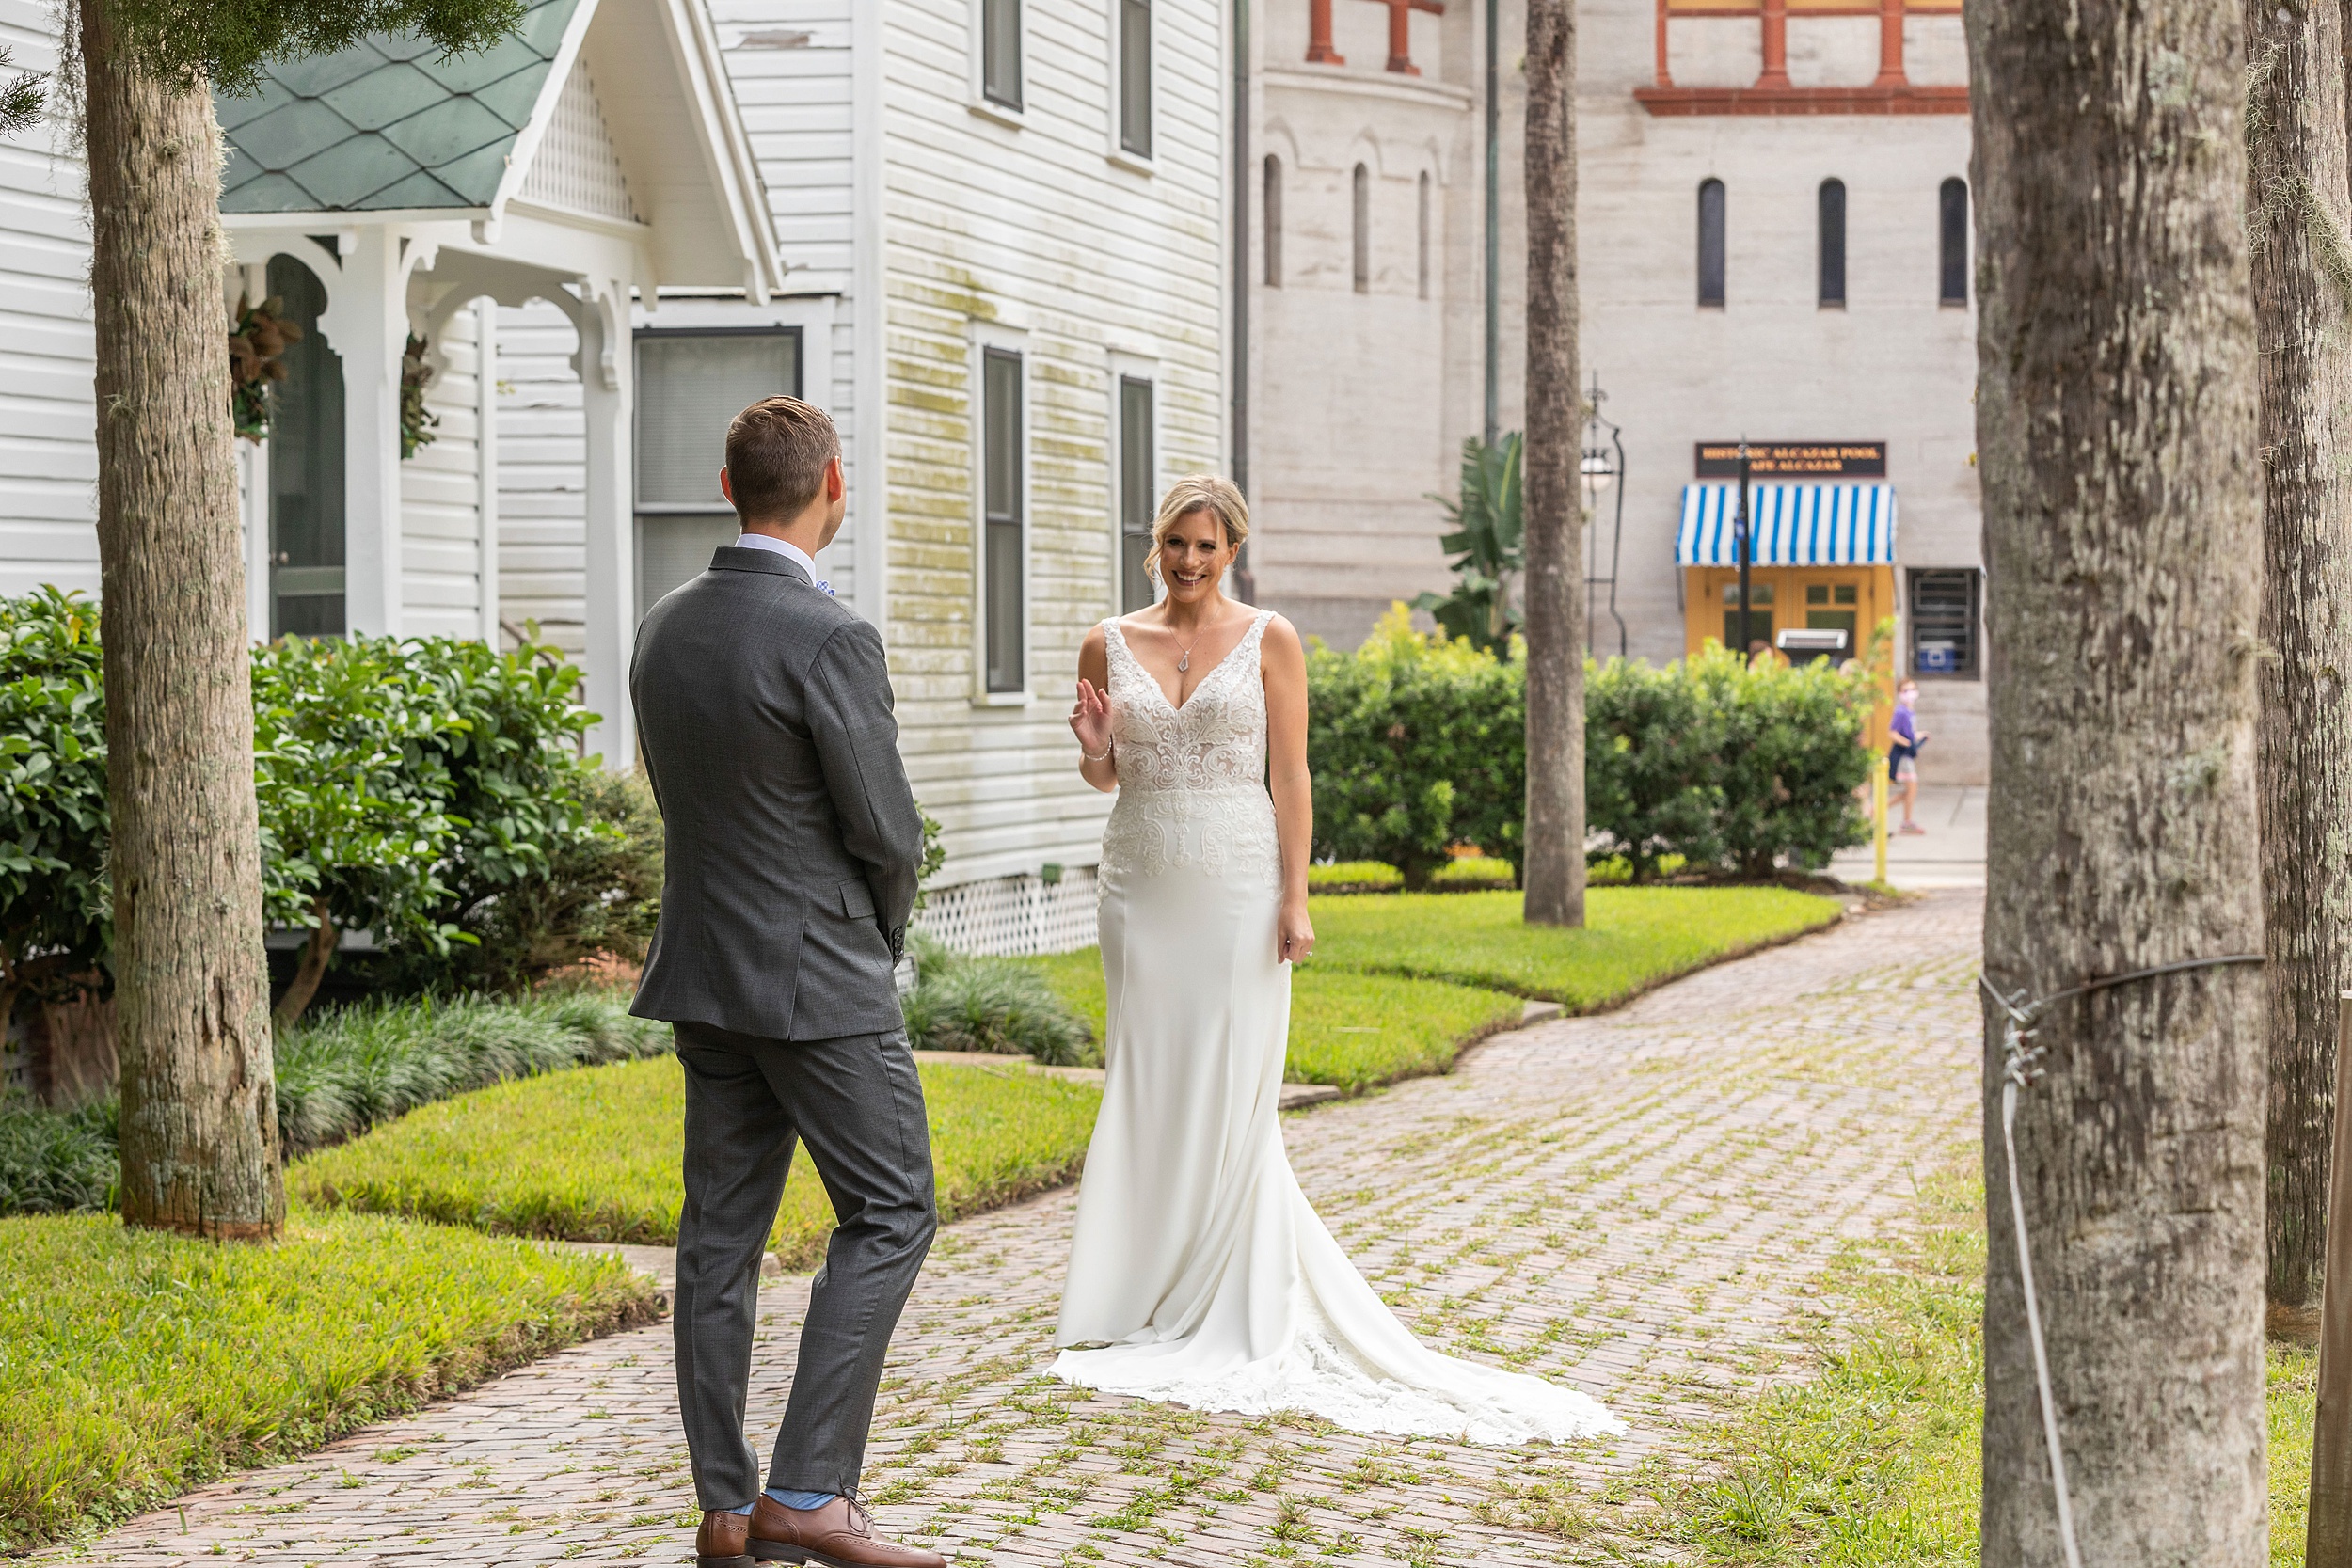 A bride waves to her groom as he sees her in her dress for the first time